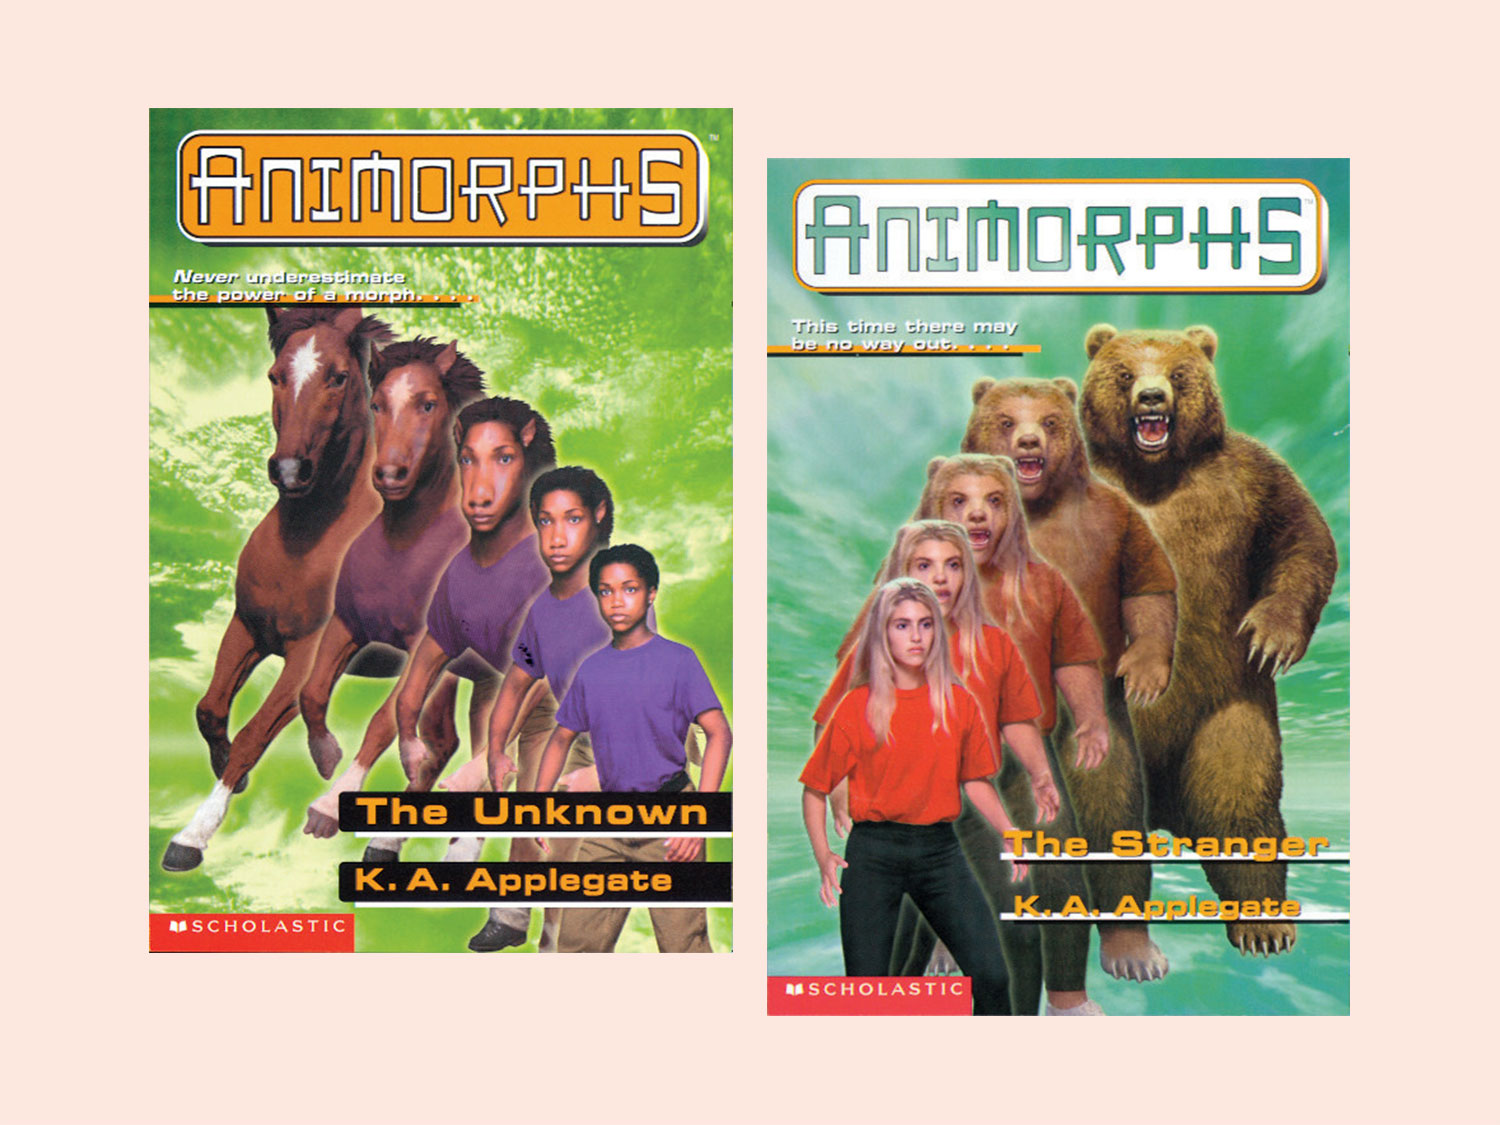 animorphs the message